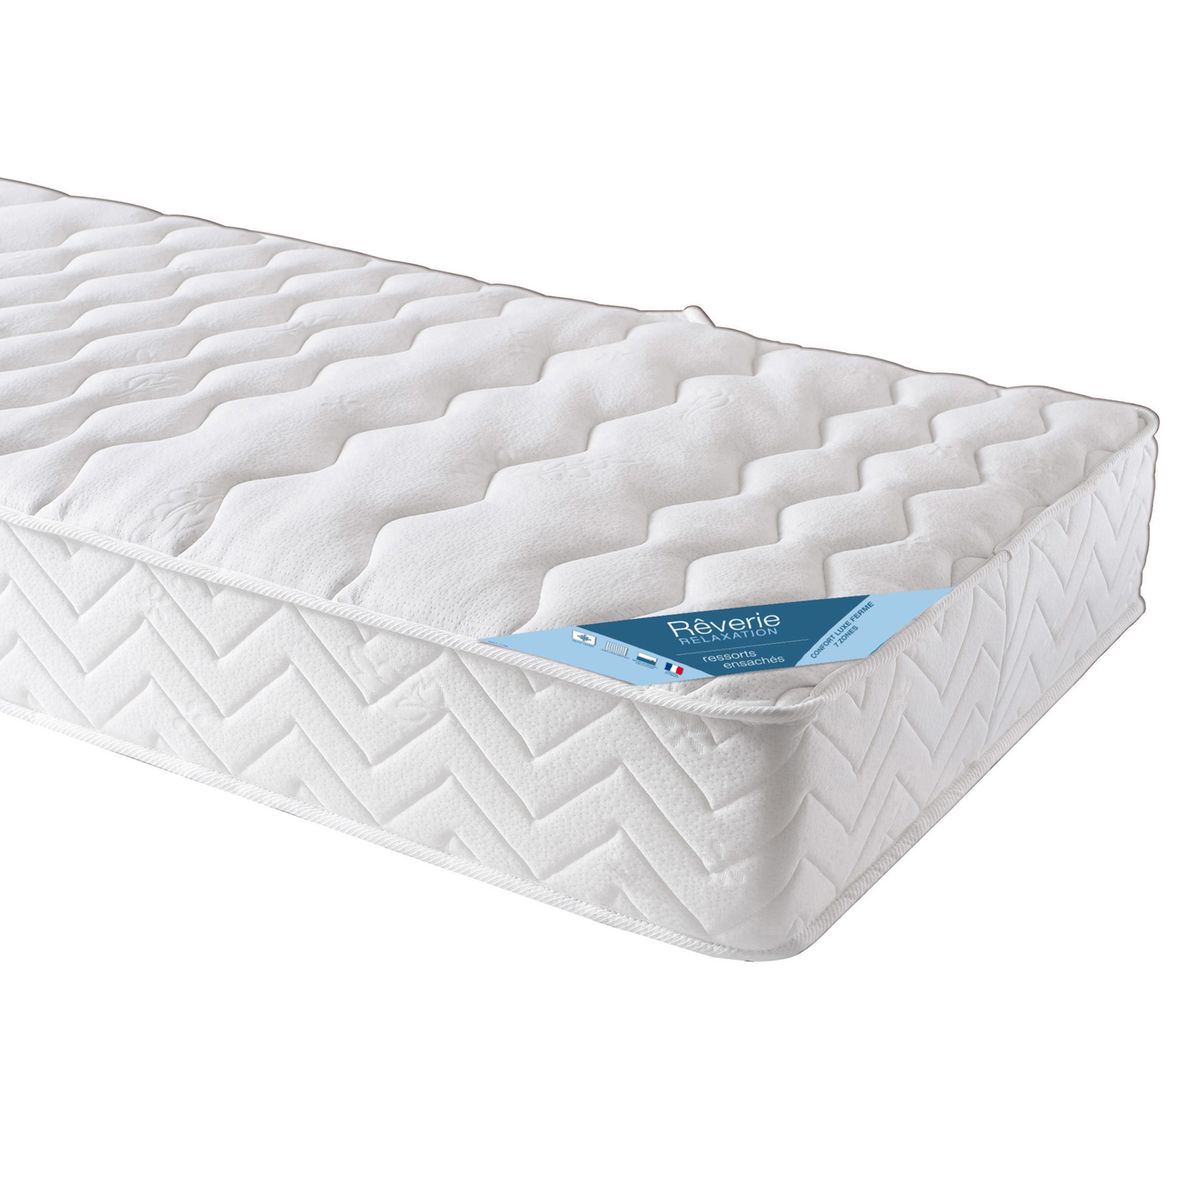 matelas a ressorts ensaches 7 zones, confort luxe